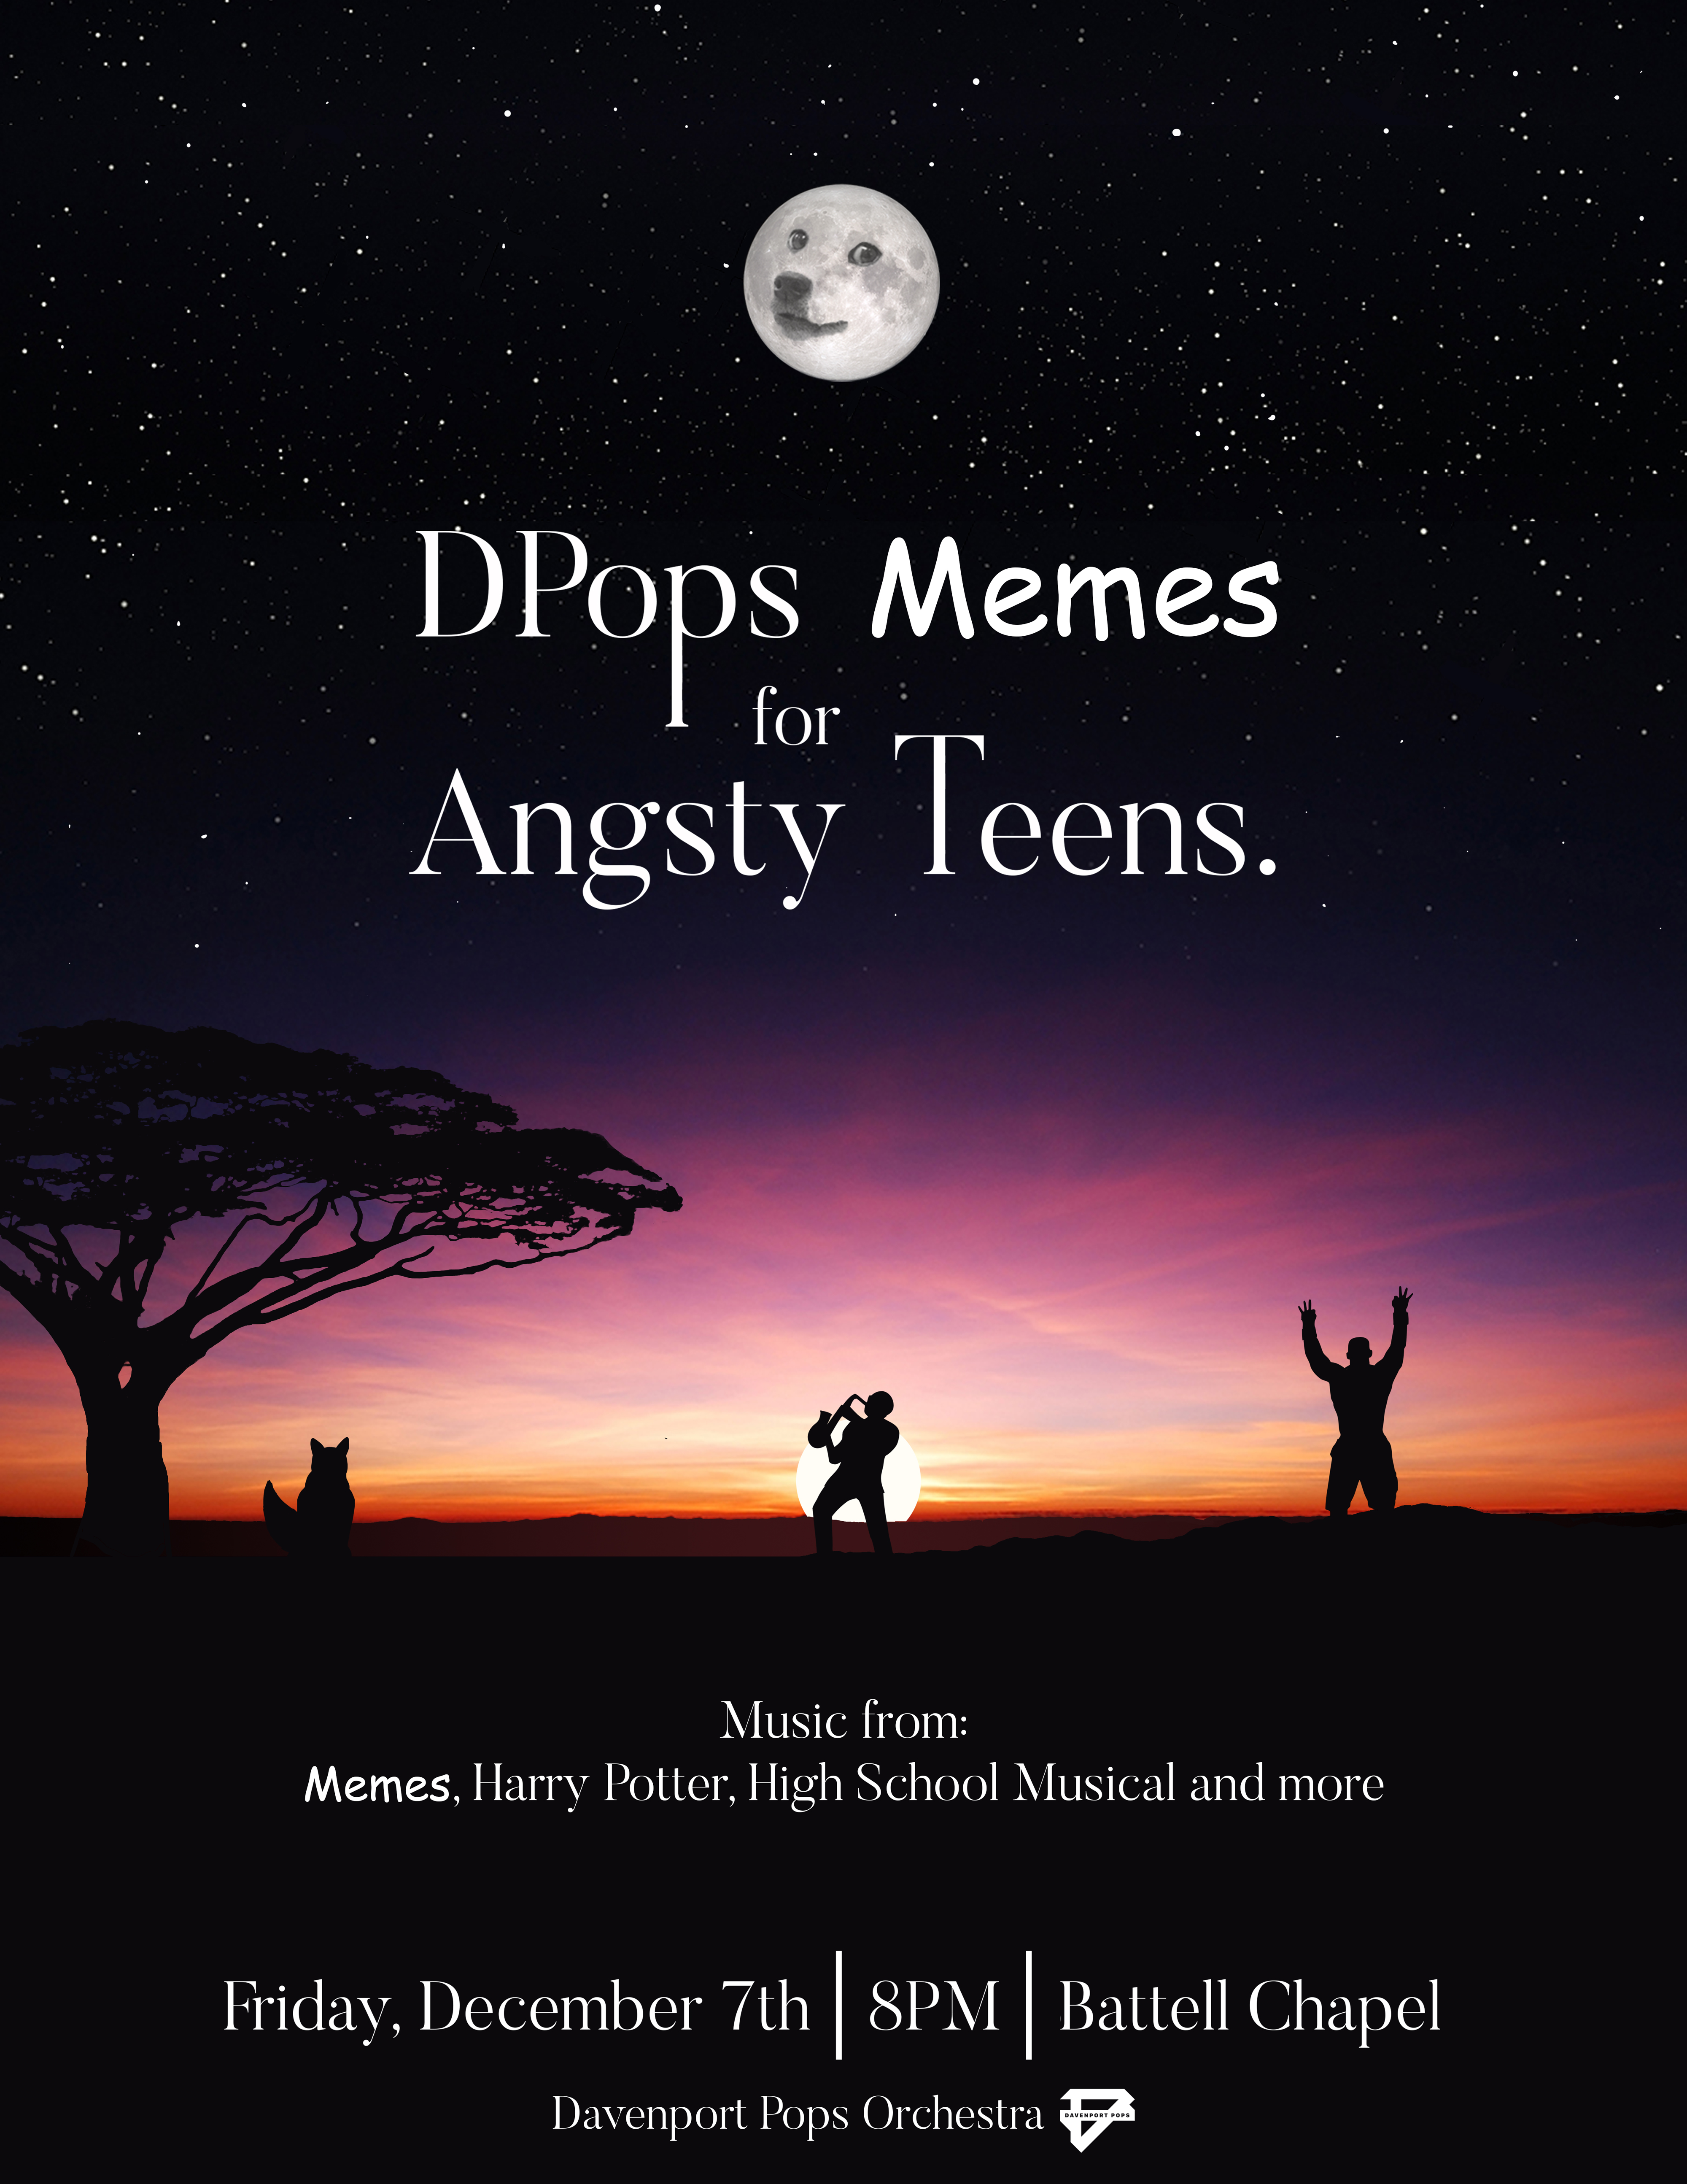 DPops Memes for Angsty Teens